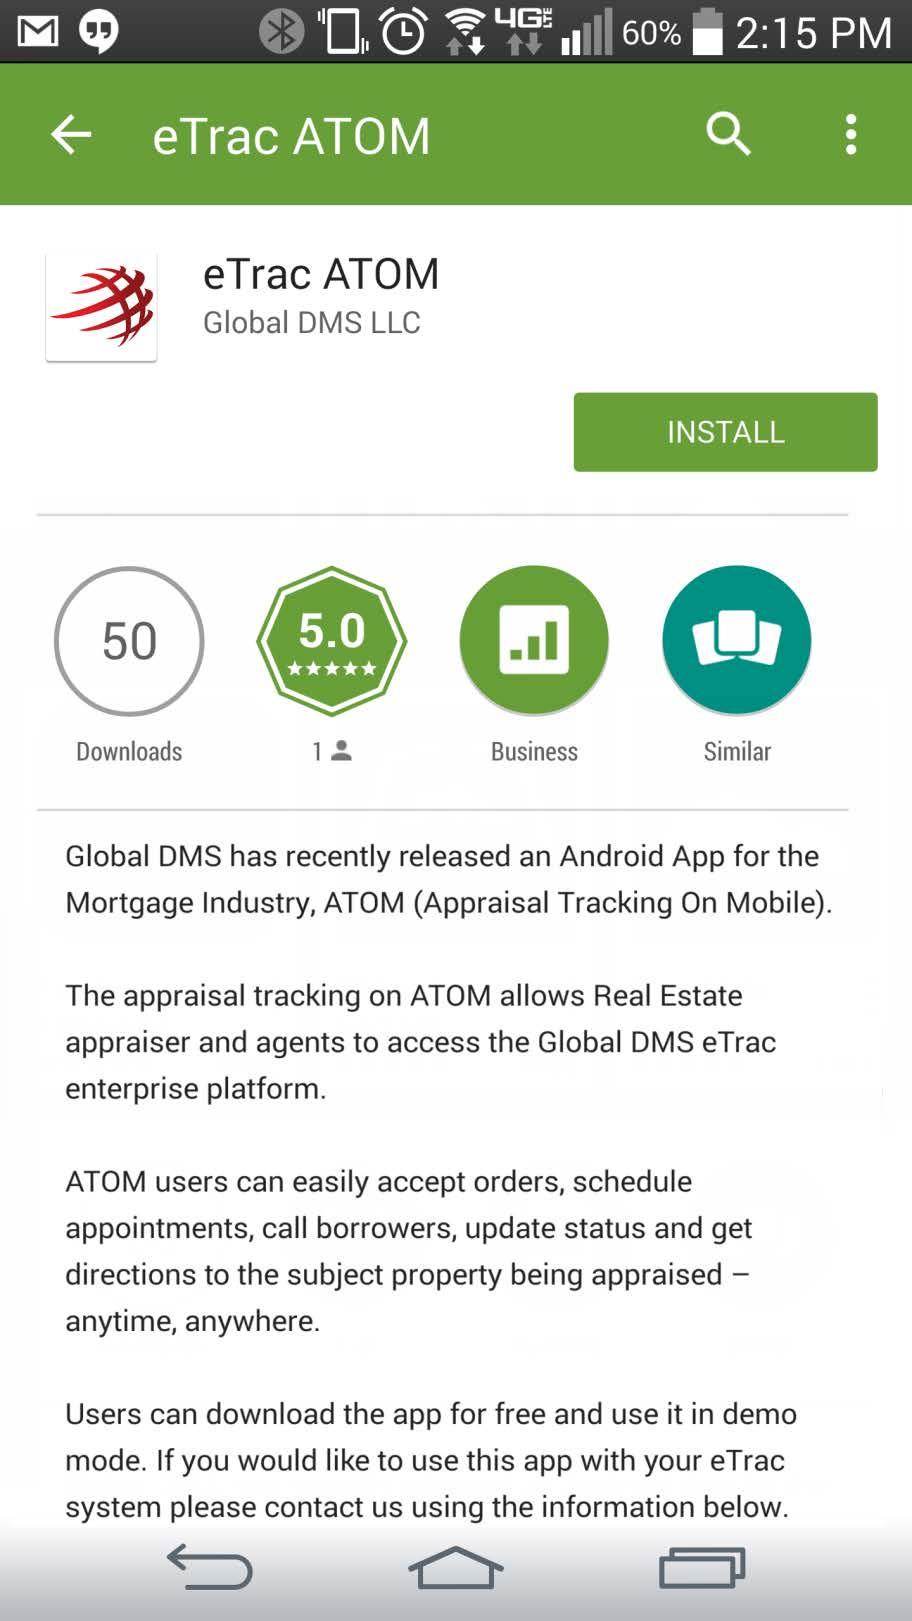 Initial Setup To begin the initial setup for etrac ATOM, you must have the app installed on your mobile device.